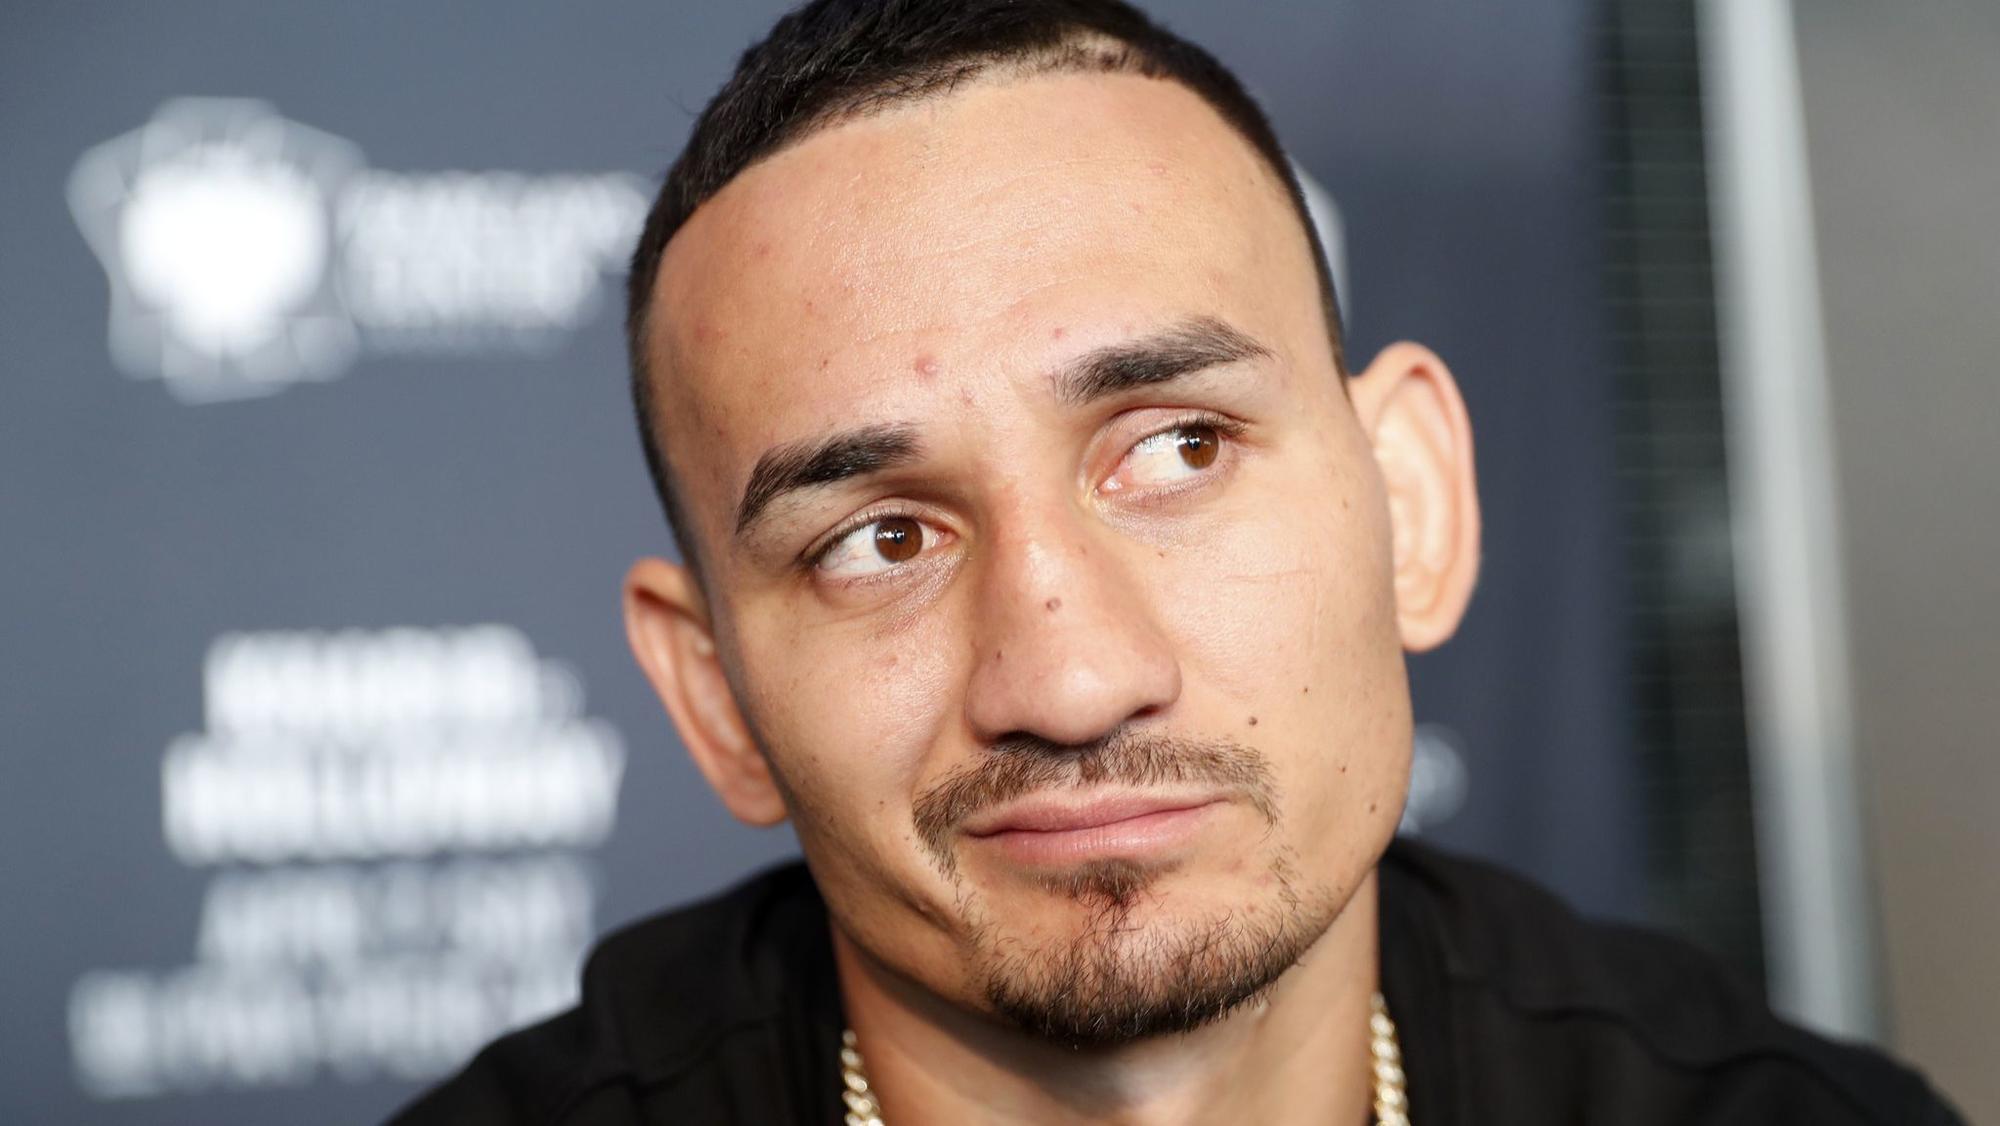 UFC featherweight champ Max Holloway drops out of fight because of